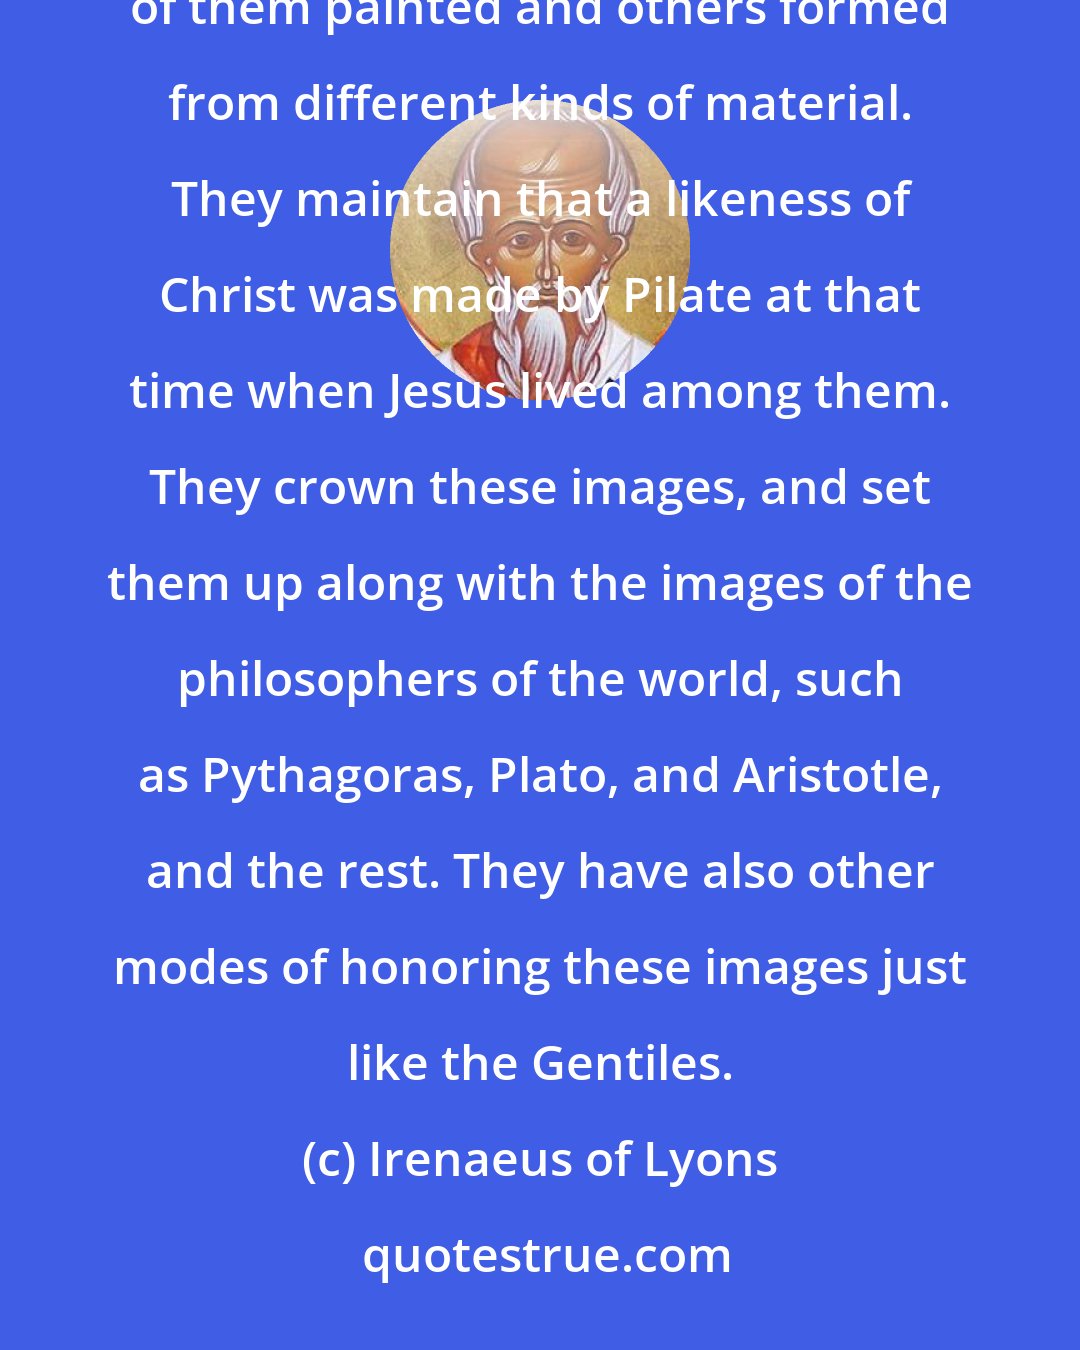 Irenaeus of Lyons: Others of them employ outward marks ... They style themselves Gnostics. They also possess images, some of them painted and others formed from different kinds of material. They maintain that a likeness of Christ was made by Pilate at that time when Jesus lived among them. They crown these images, and set them up along with the images of the philosophers of the world, such as Pythagoras, Plato, and Aristotle, and the rest. They have also other modes of honoring these images just like the Gentiles.